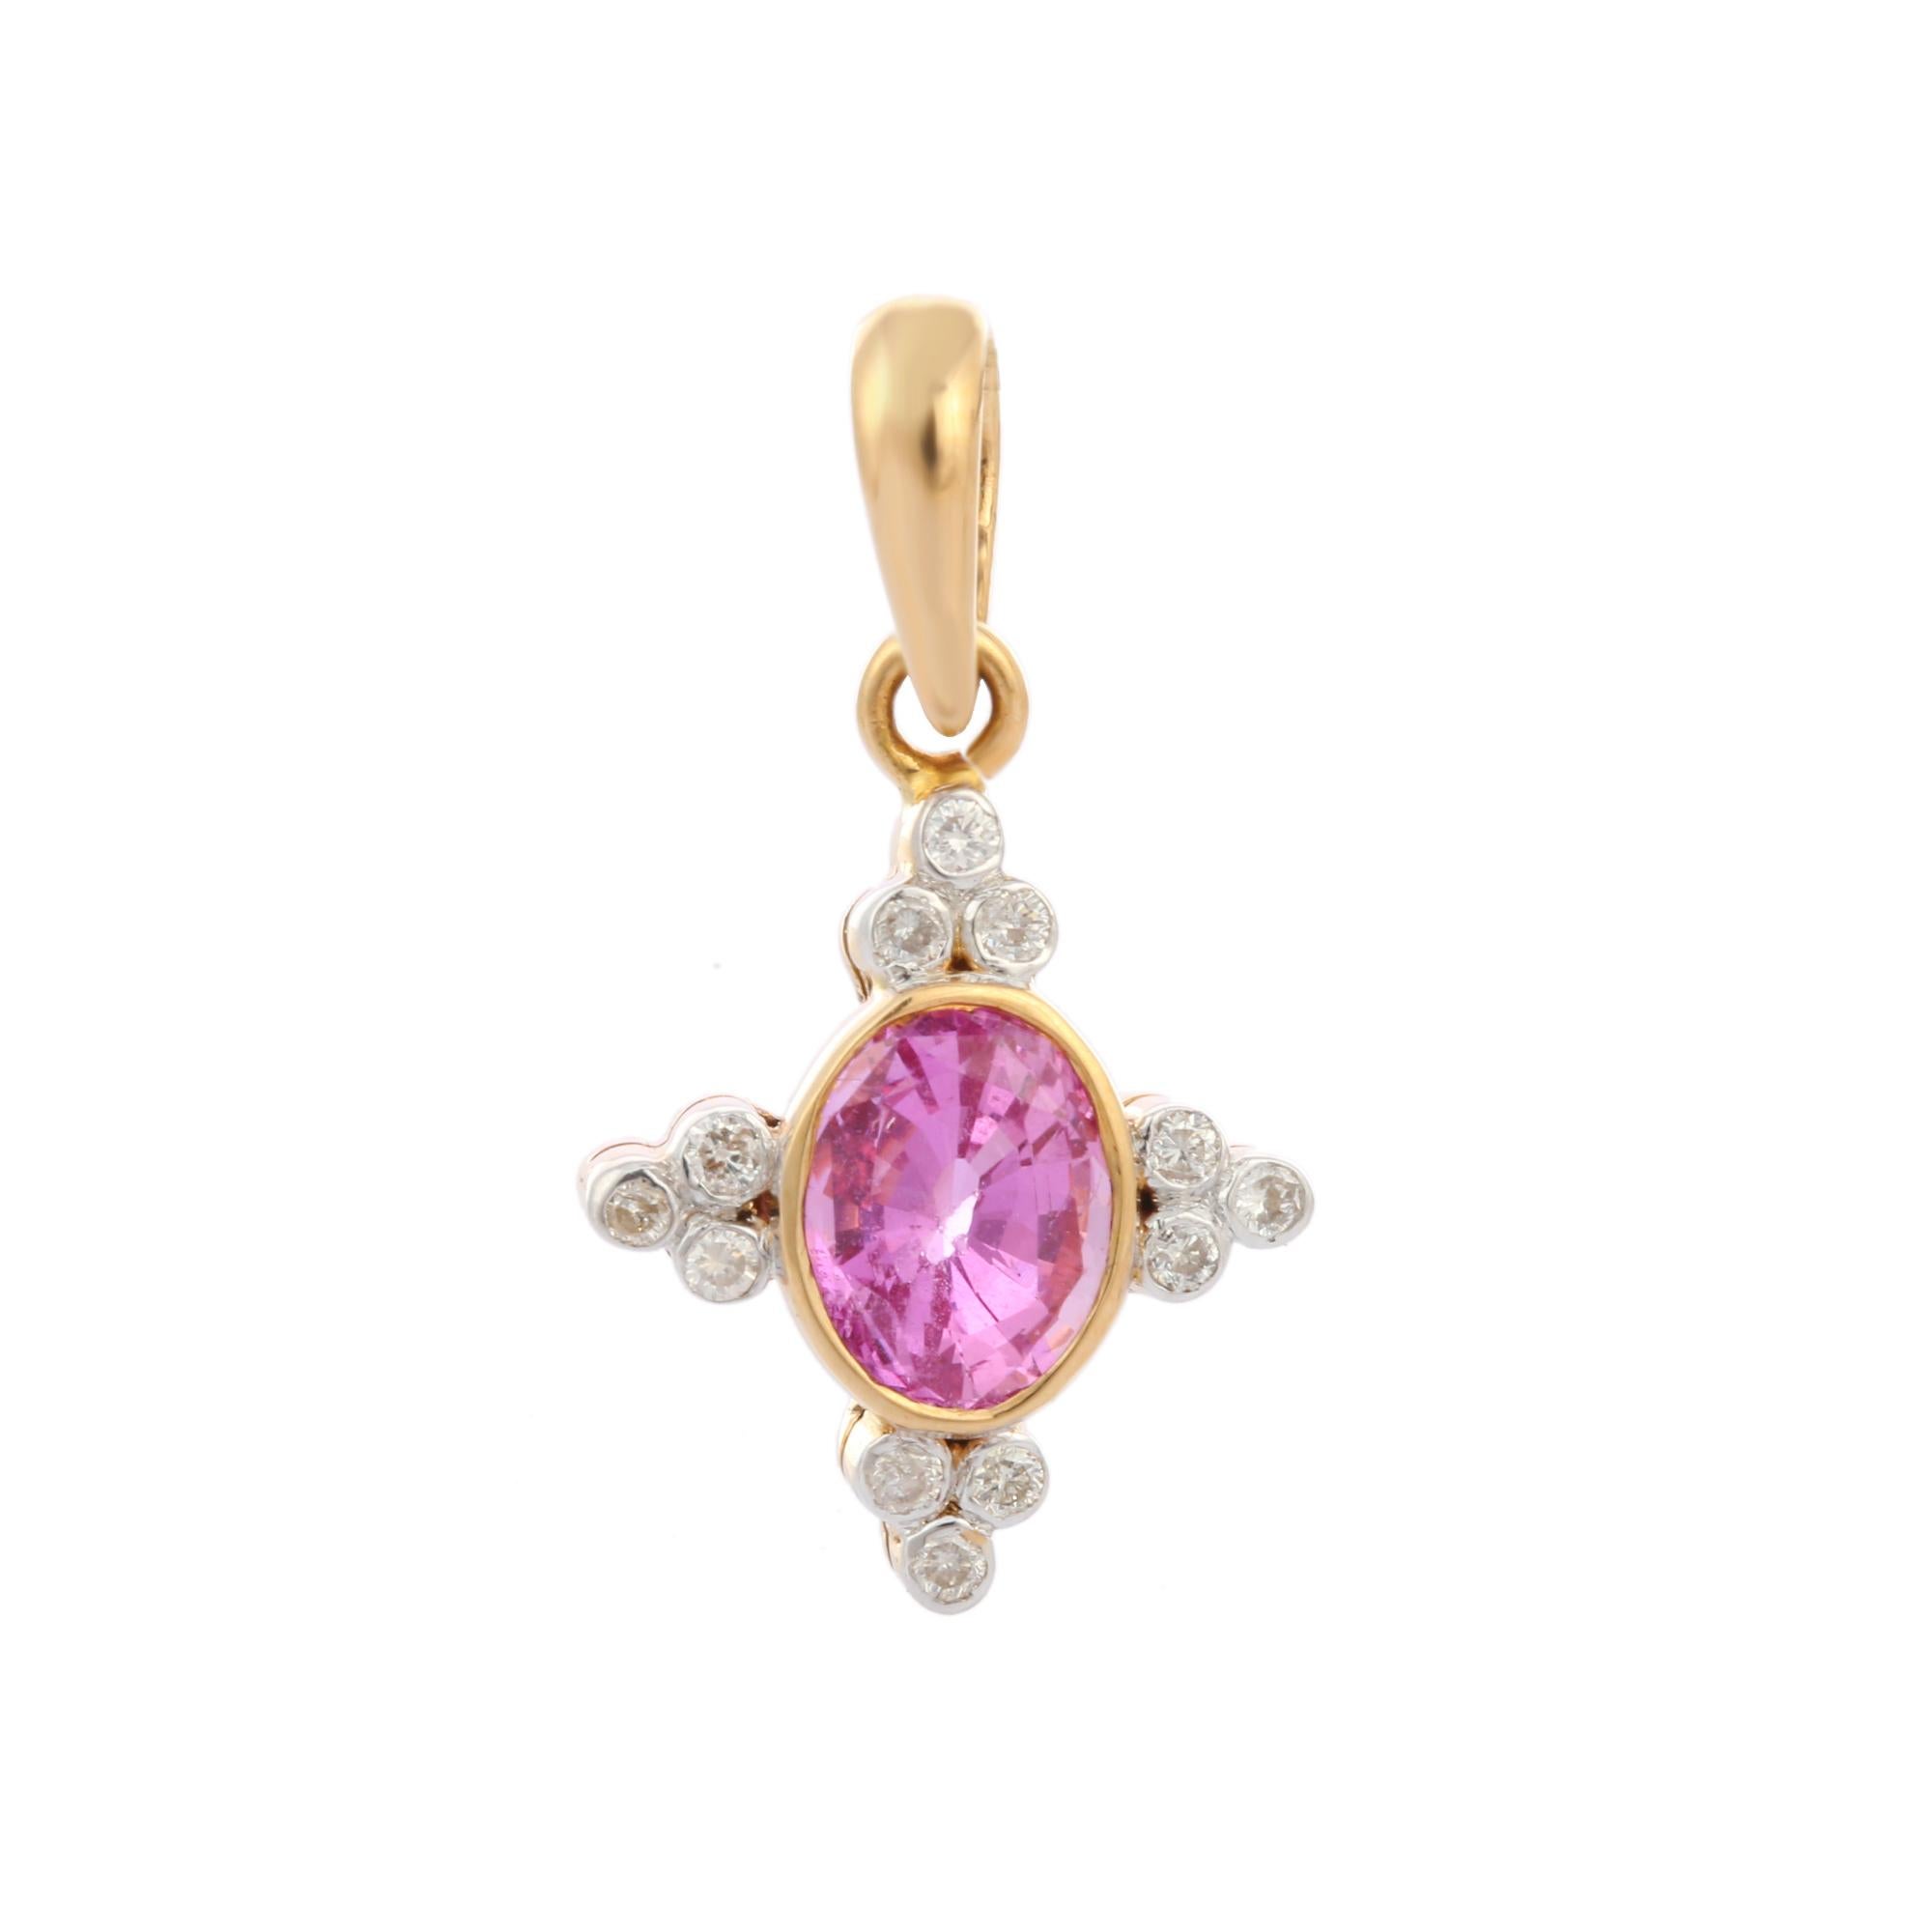 Pink sapphire and diamond cross pendant in 18K Gold. It has a oval cut sapphire studded with diamonds that completes your look with a decent touch. Pendants are used to wear or gifted to represent love and promises. It's an attractive jewelry piece